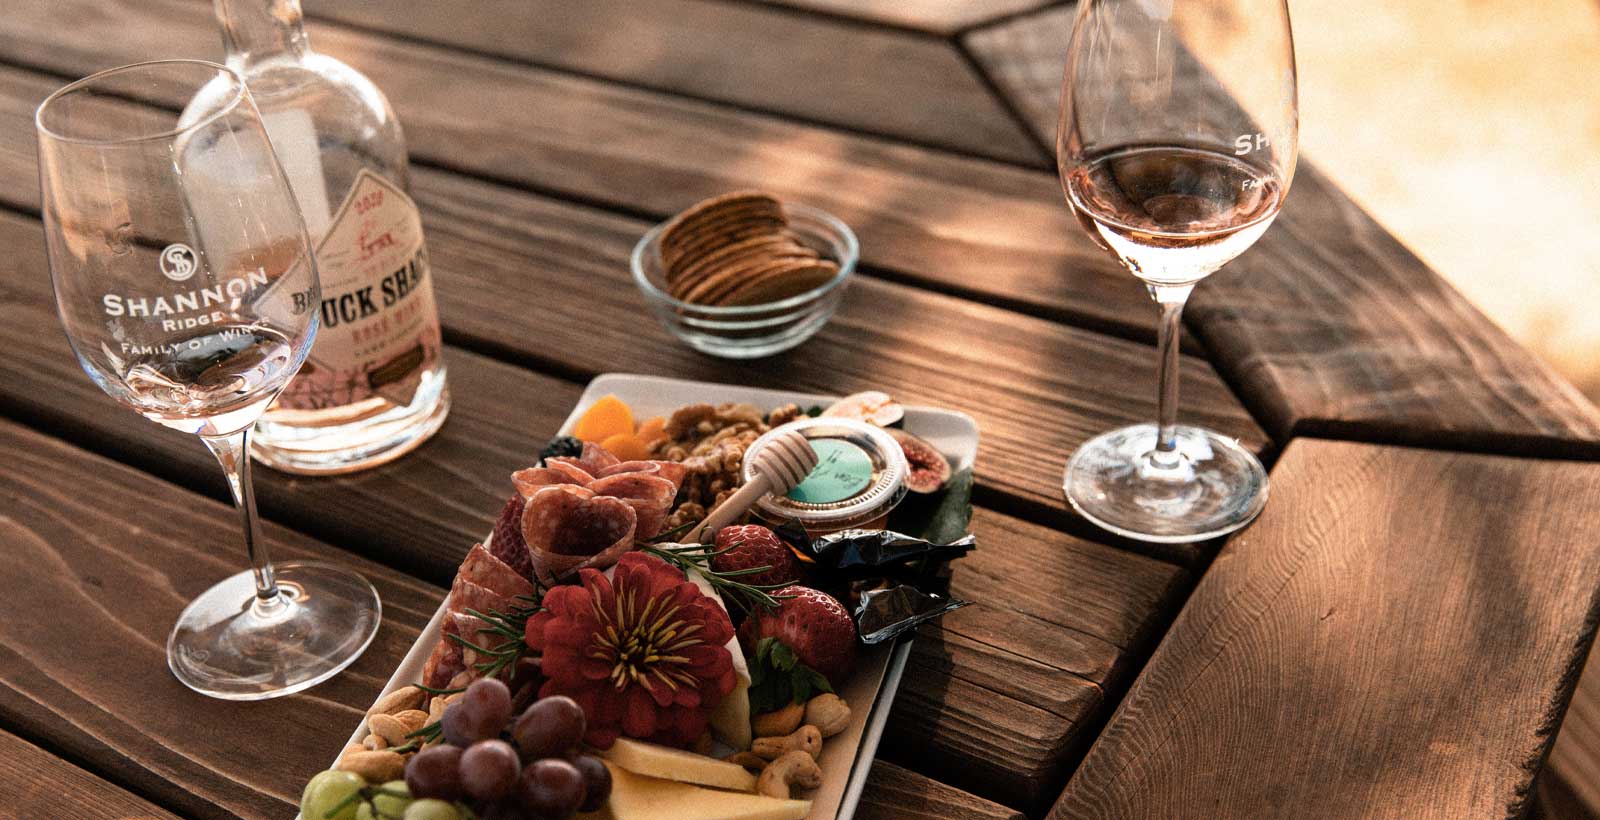 Charcuterie and wine at Shannon Ridge